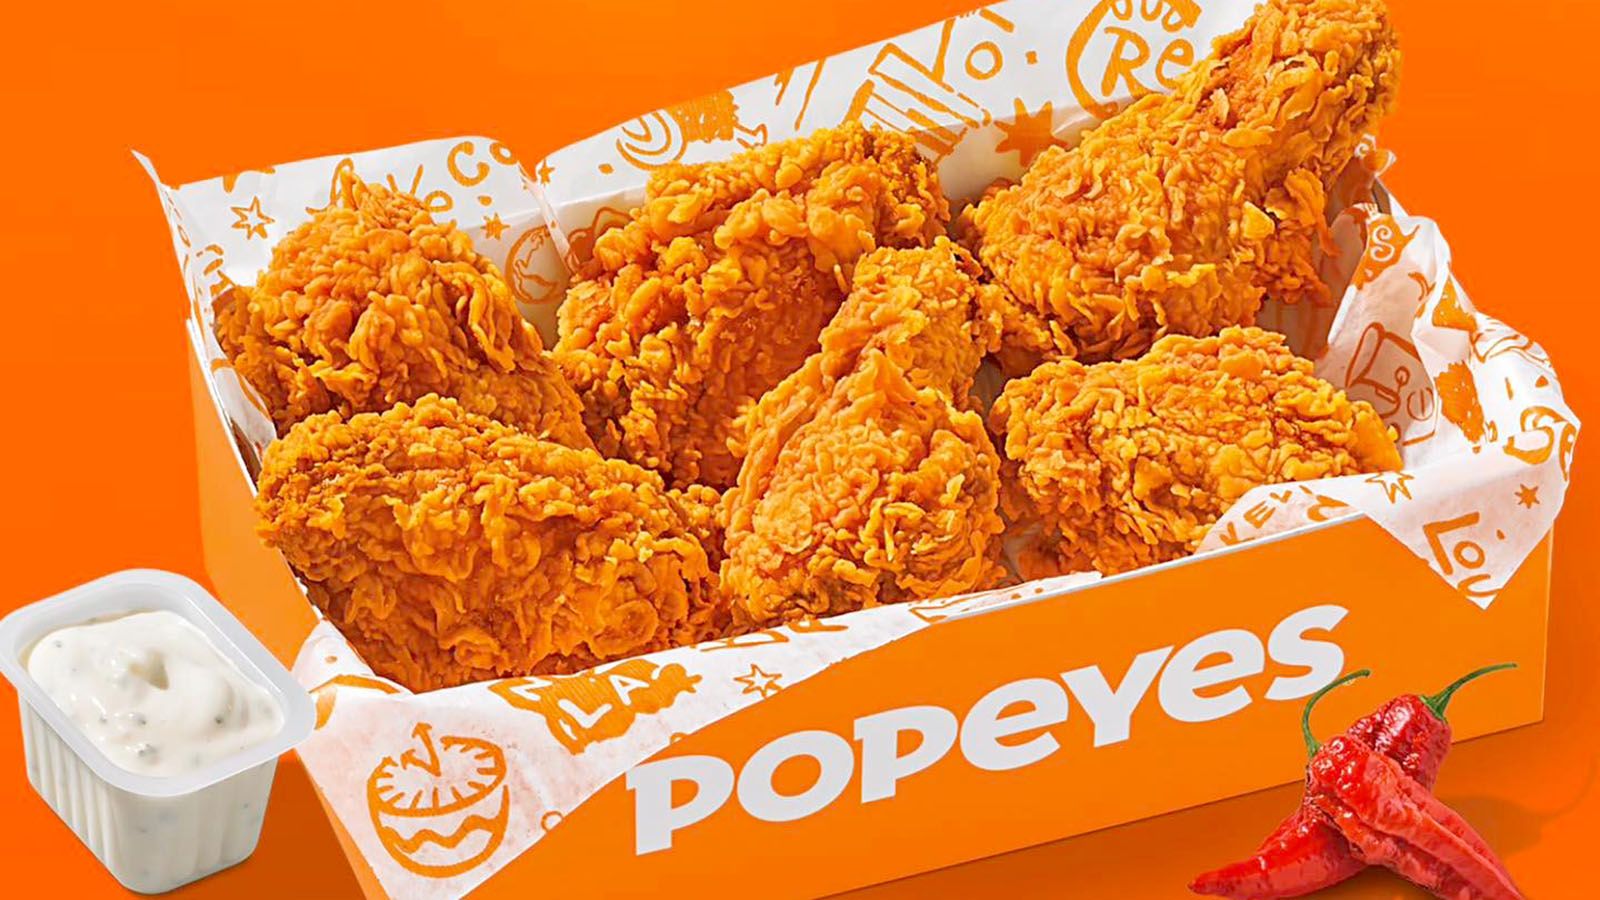 Popeyes recently opened its third Fort Wayne location, this time on Illinois Road.